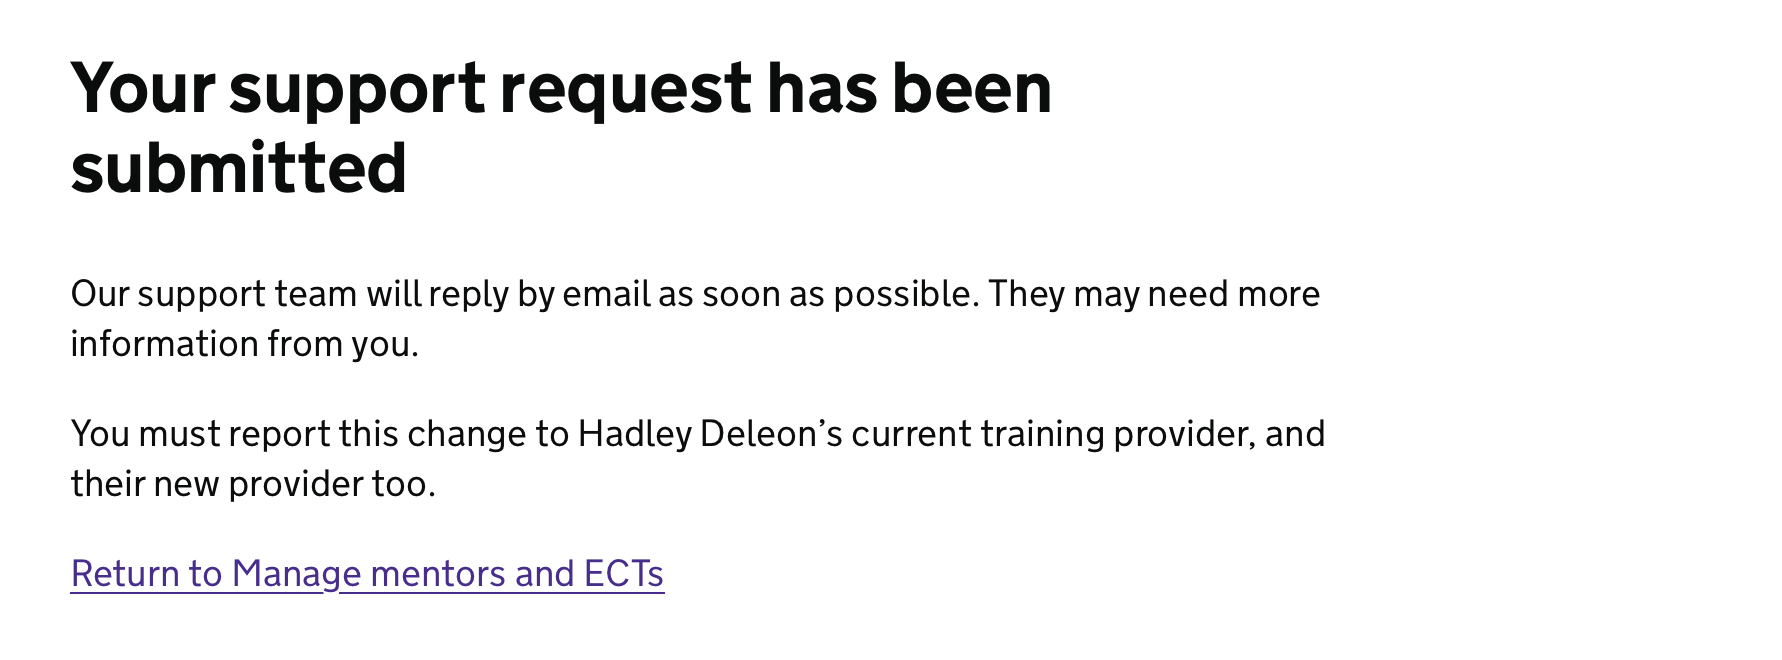 Screenshot showing a page titled ‘Your support request has been submitted’. This is followed by ‘Our support team will reply by email as soon as possible. They may need more information from you. You must report this change to Hadley Deleon's current training provider, and their new provider too.’ which is followed by a link labelled ‘Return to Manage mentors and ECTs’